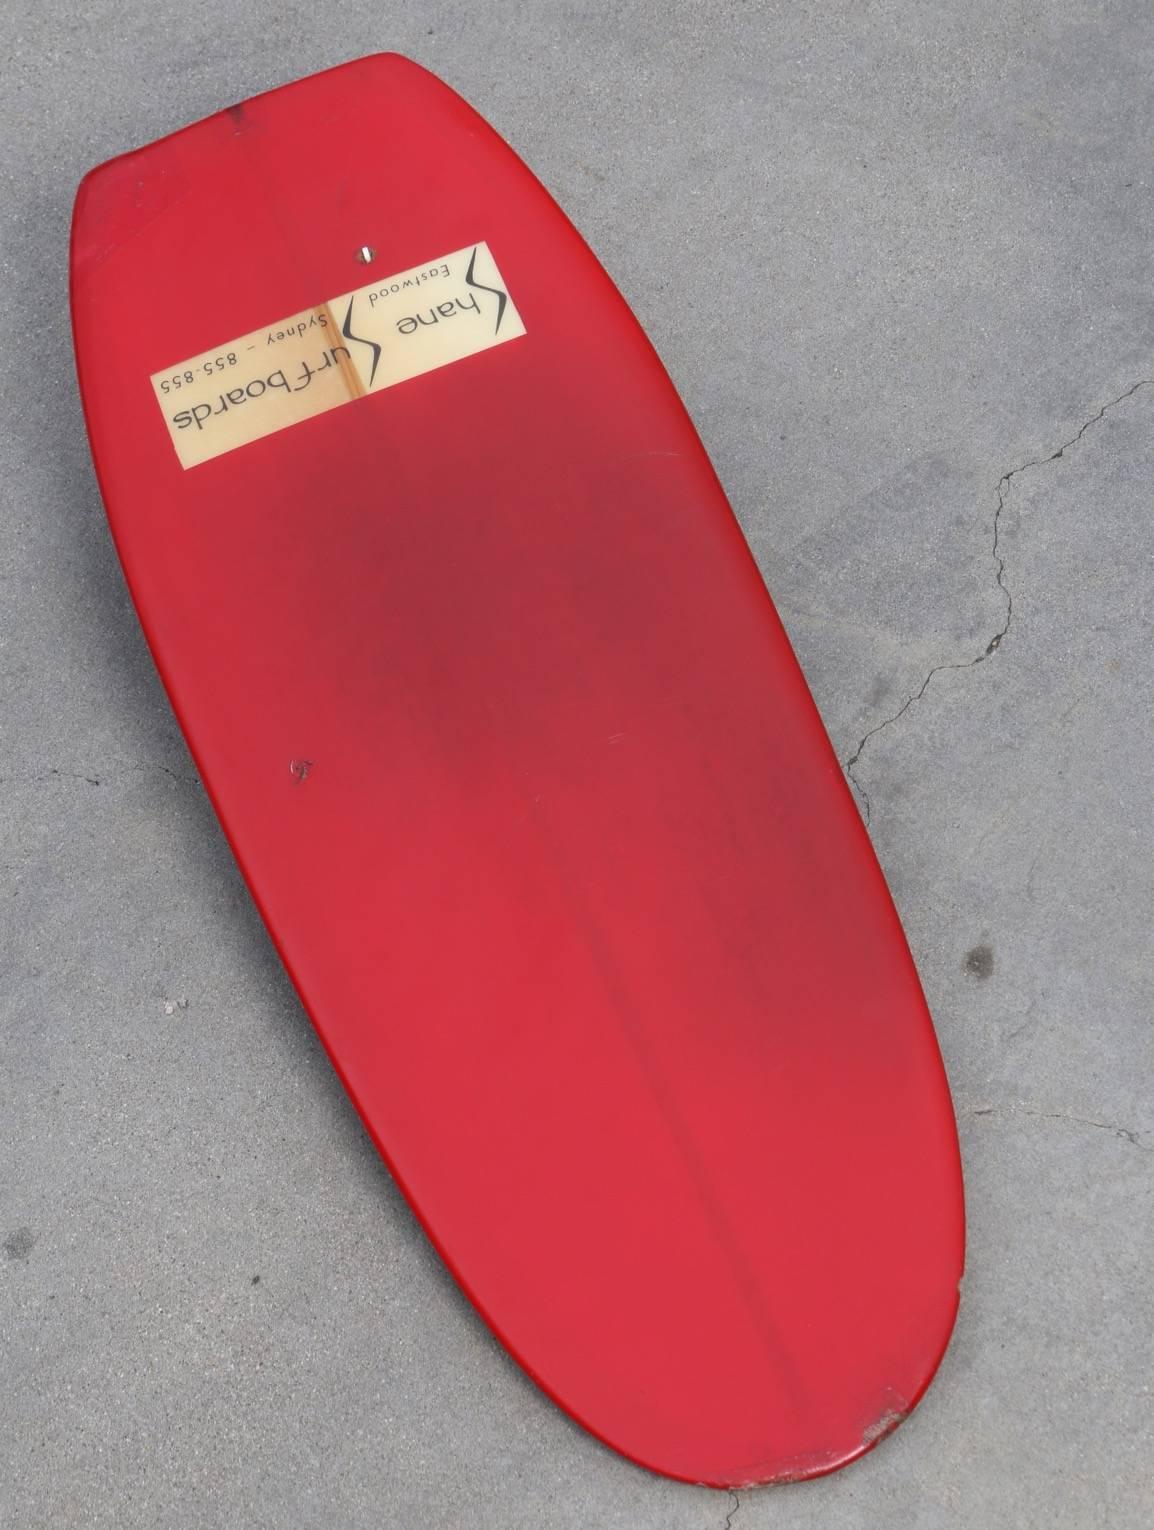 Beautiful and rare Shane Surfboards, Paipo or Belly-Board, circa 1965. Manufactured by Shane Steadman from his shop in Eastwood Sydney. 

This board is bright red with a 1/2